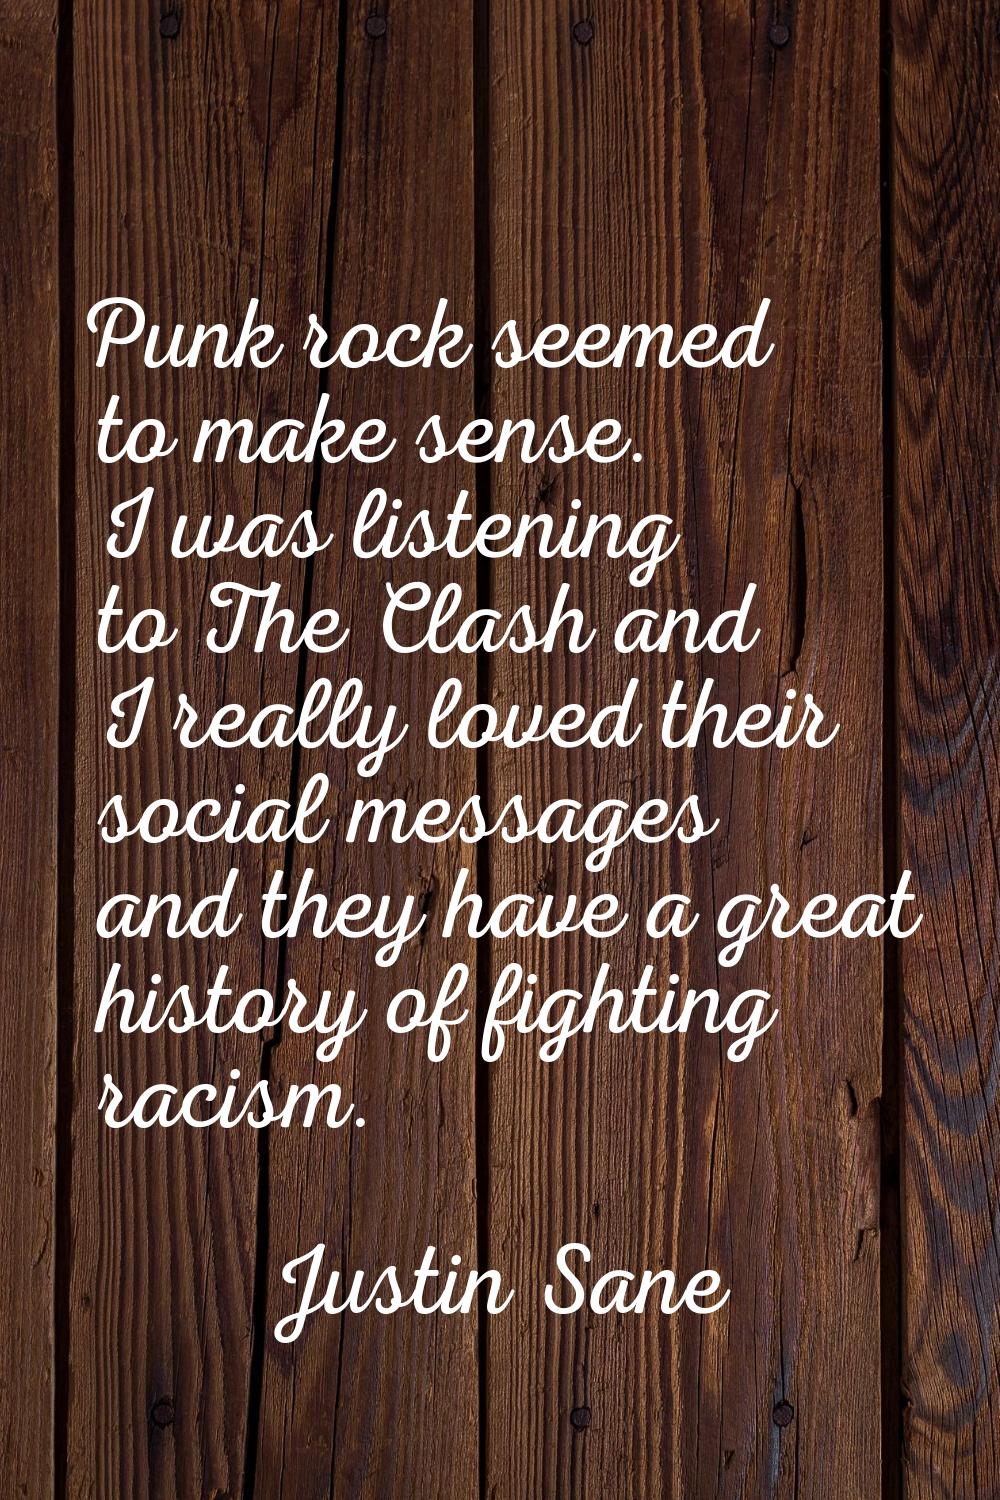 Punk rock seemed to make sense. I was listening to The Clash and I really loved their social messag